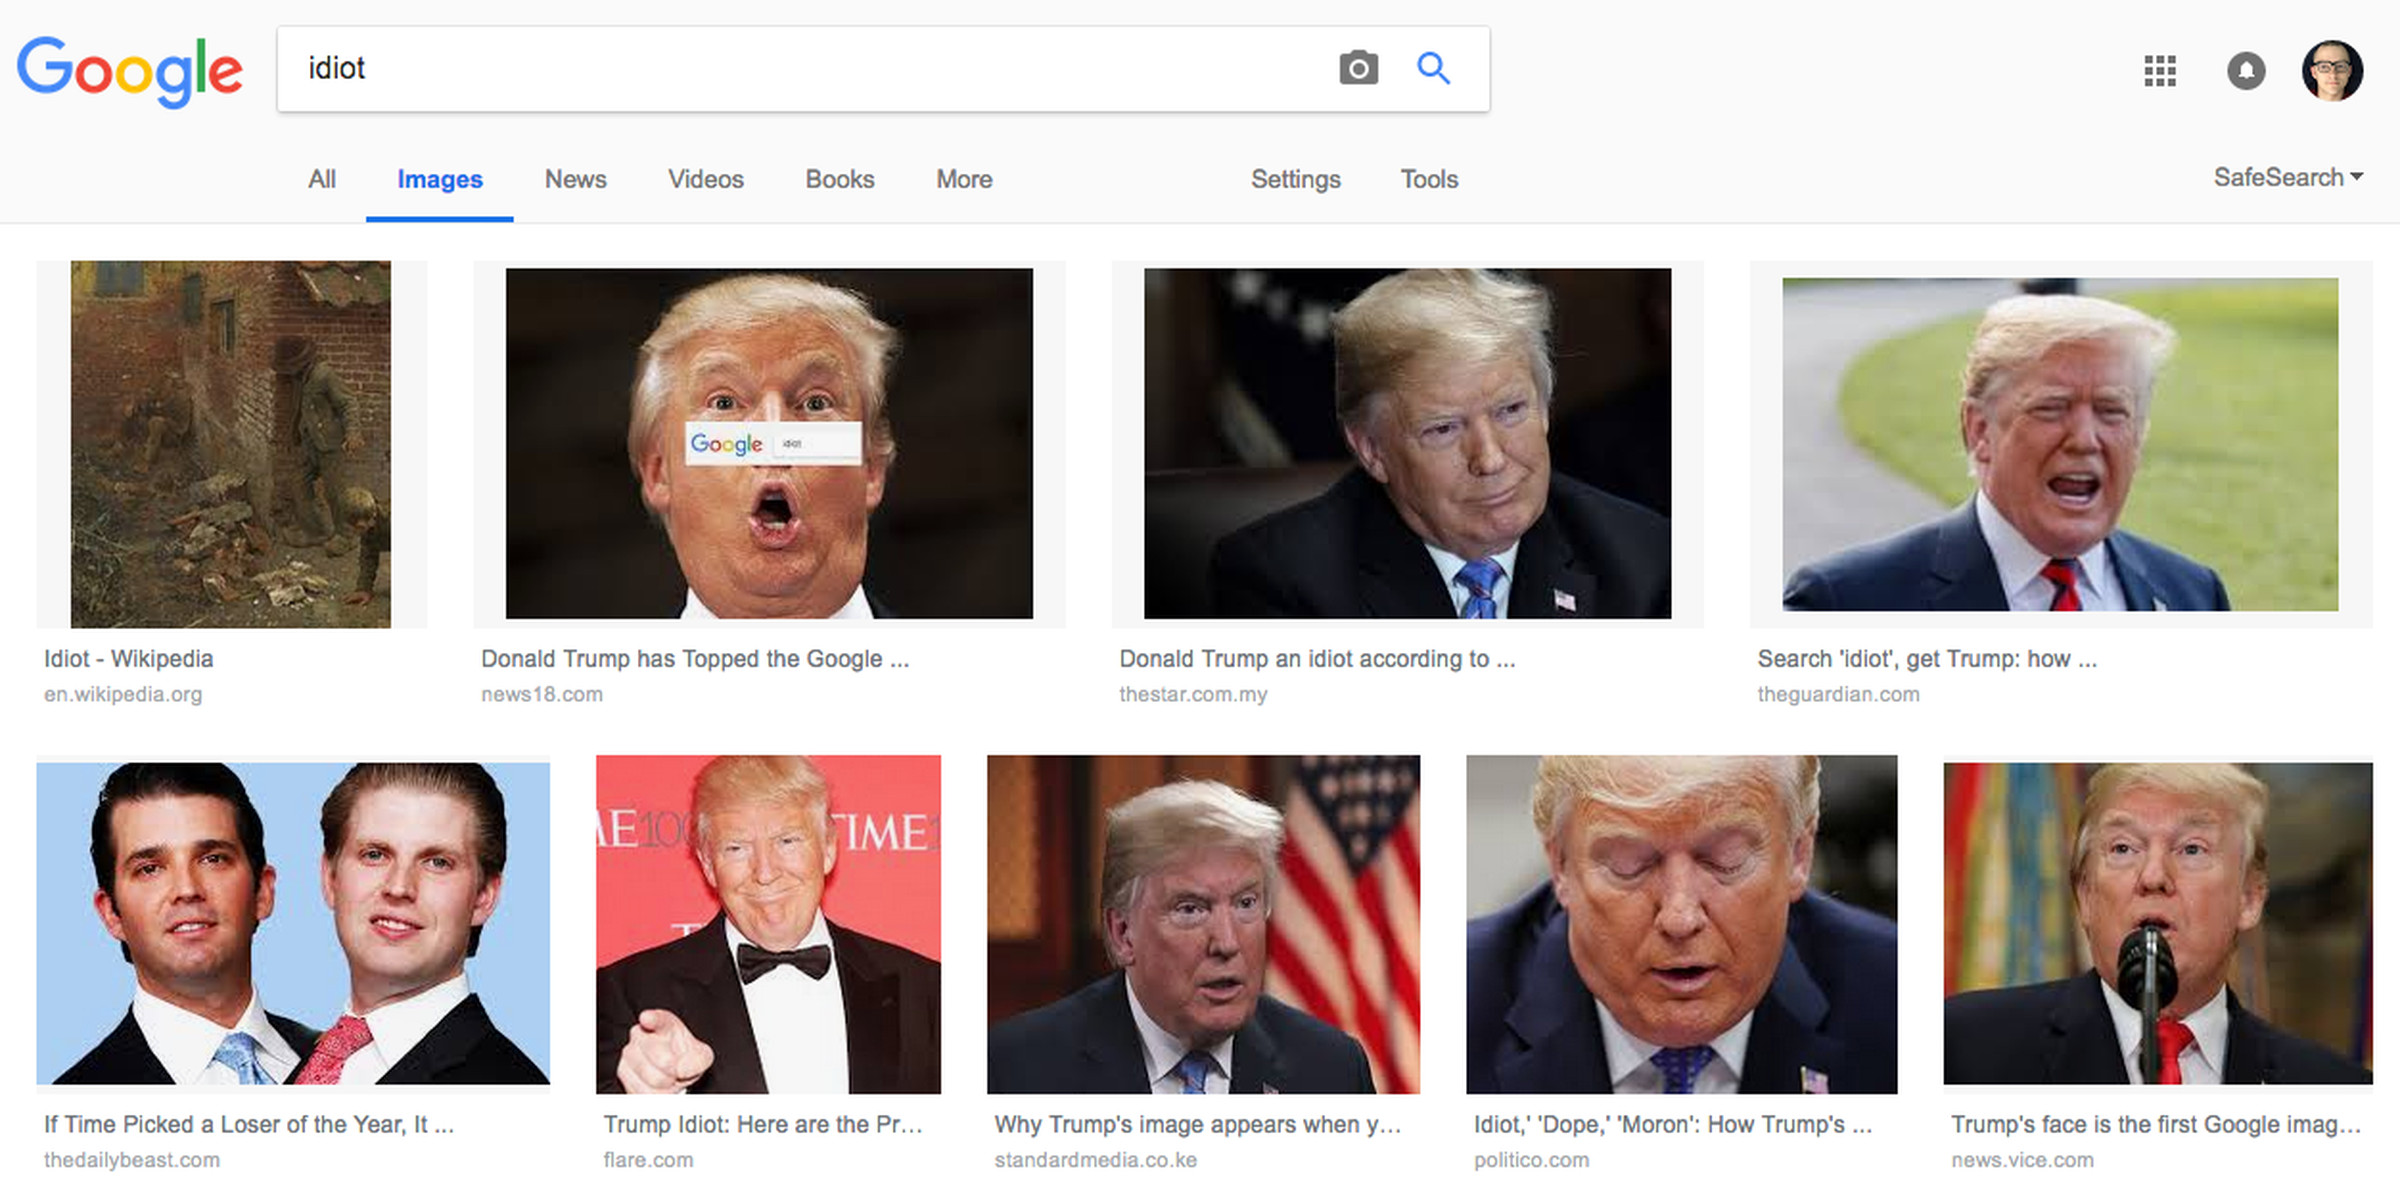 Results from a recent image search for “idiot.”